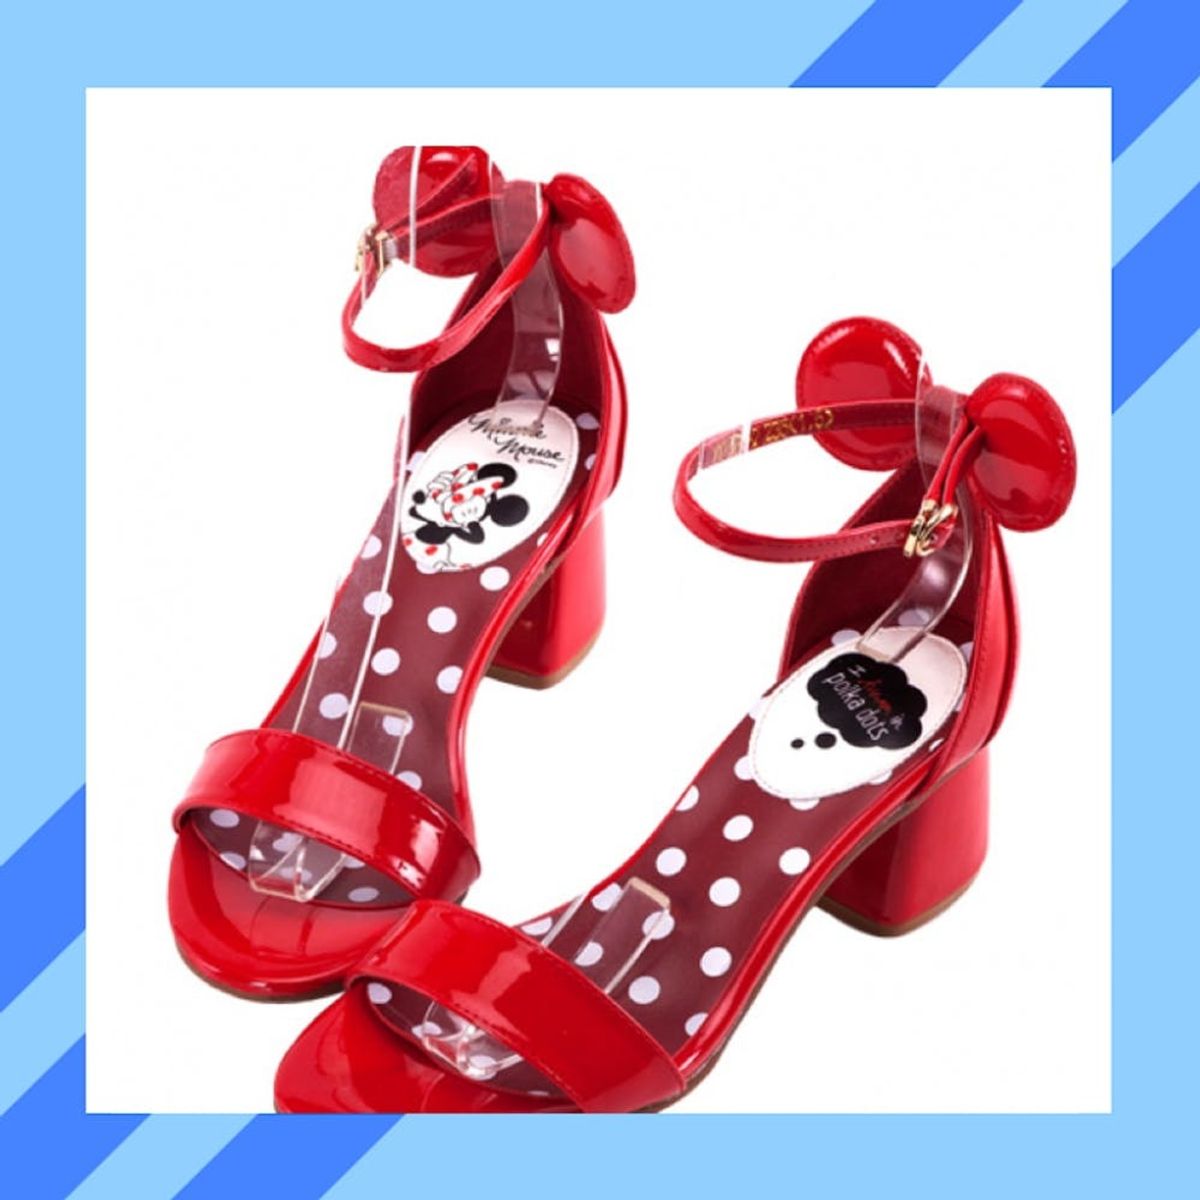 This Minnie Mouse Shoe Collection Is Too Cute for Words